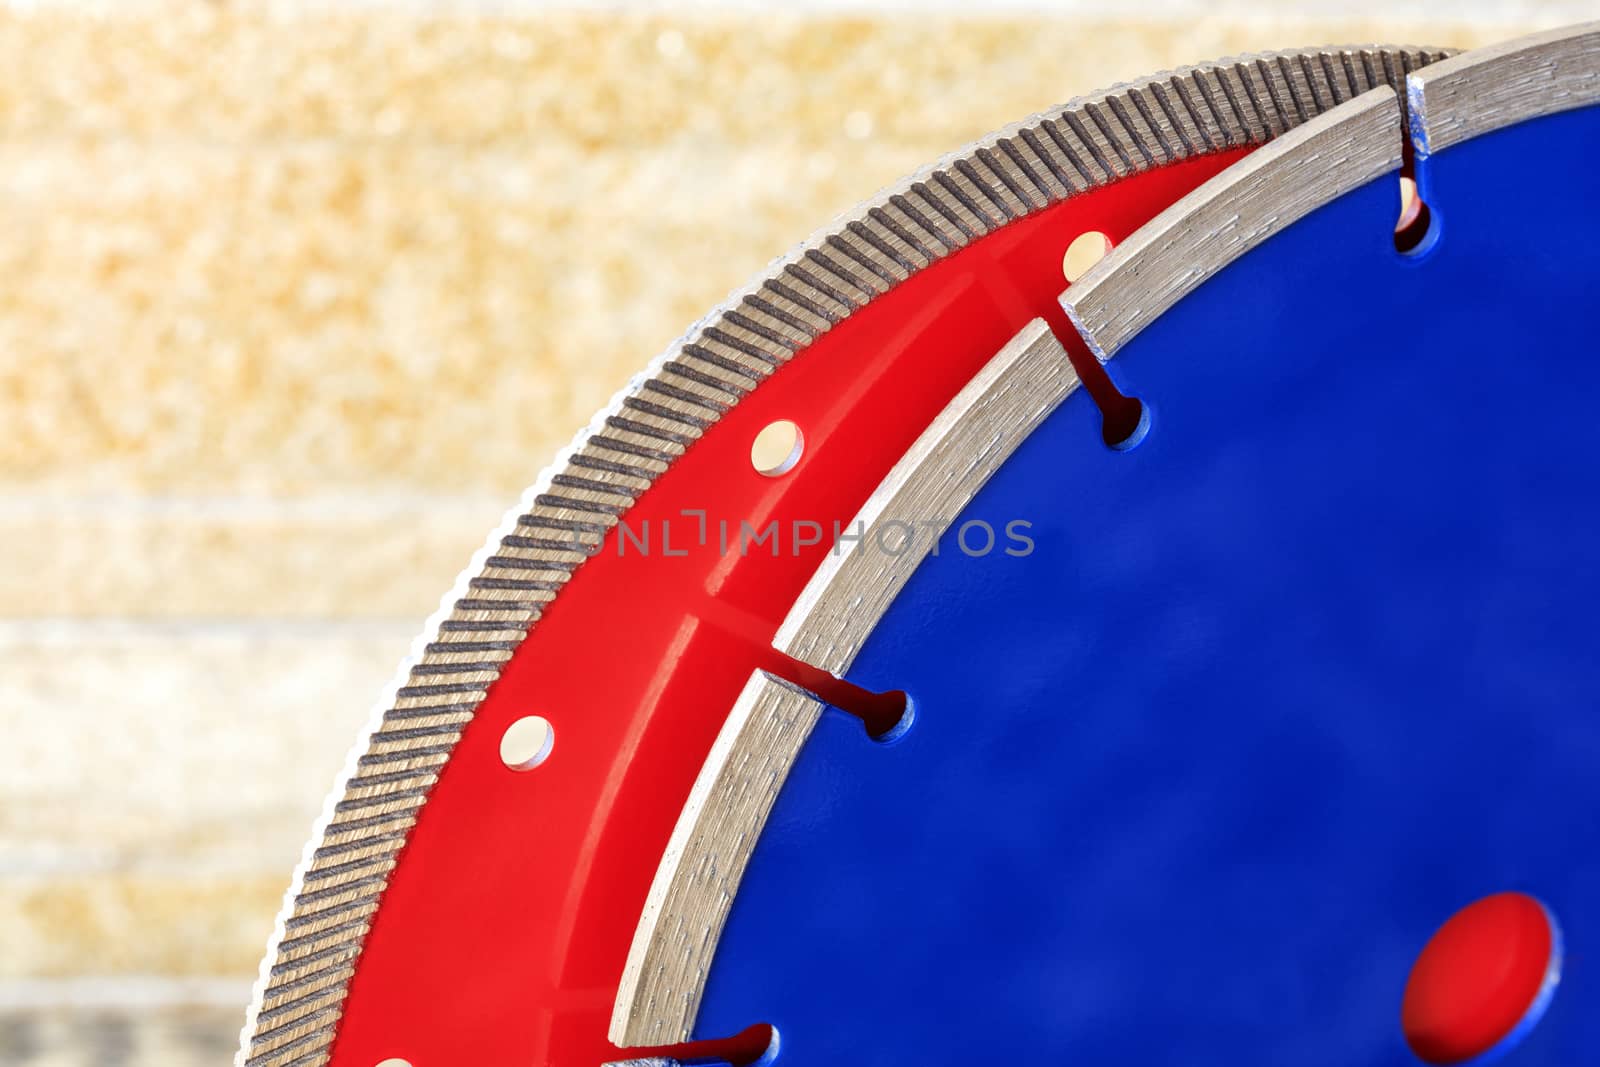 Diamond cutting discs for granite and reinforced concrete on the background of orange-golden sandstone walls. by Sergii